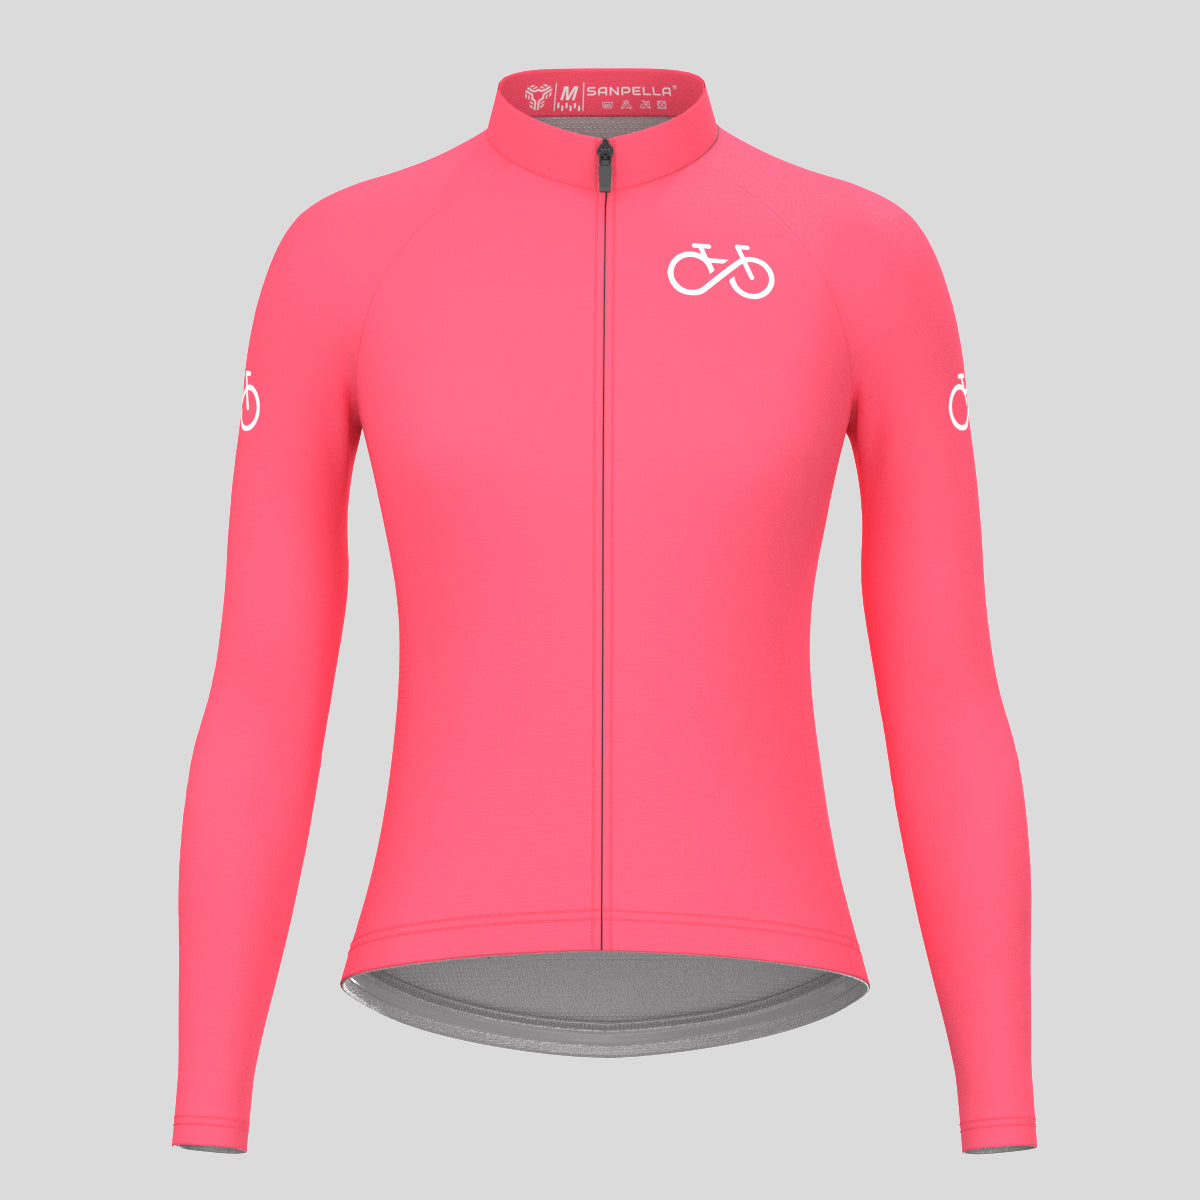 Ride Forever Women's LS Cycling Jersey - Pink